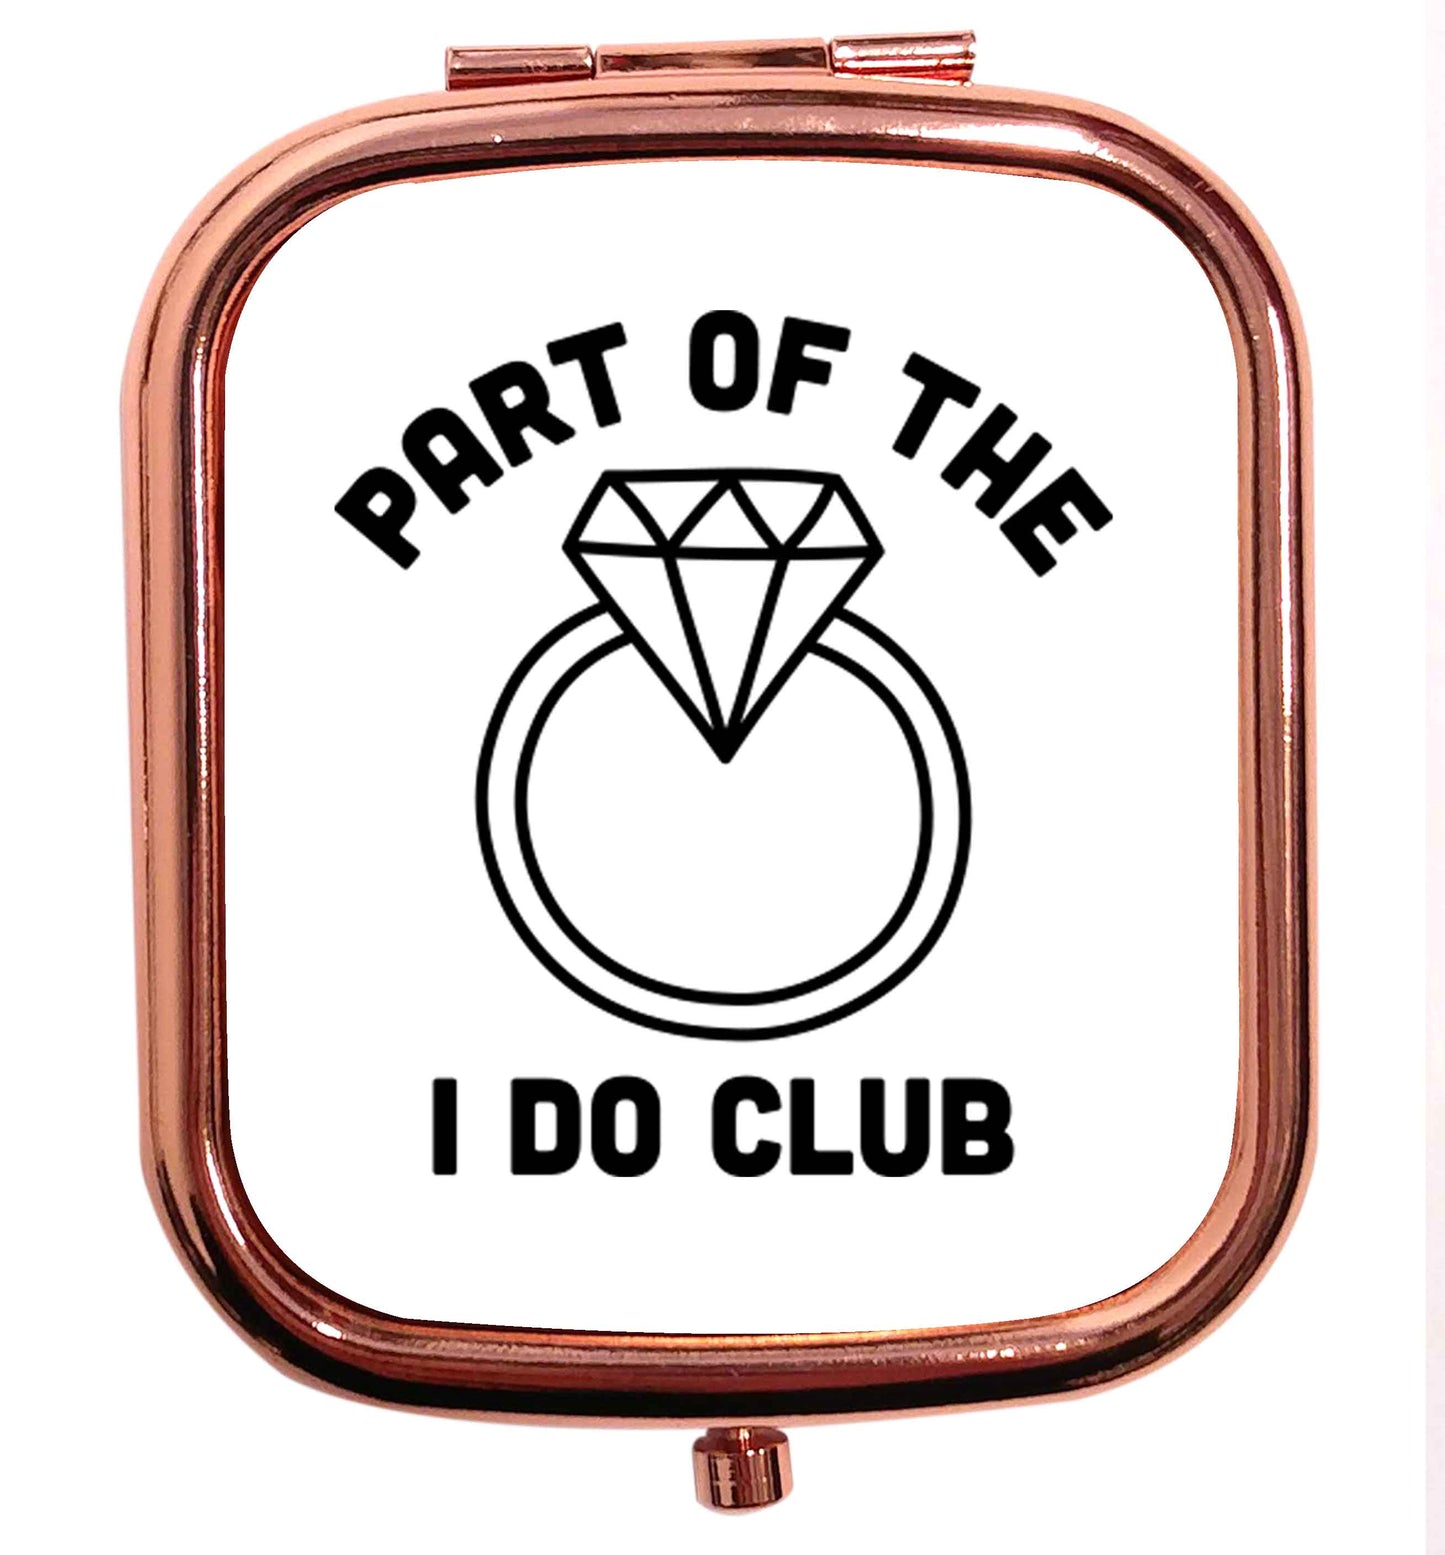 Part of the I do club rose gold square pocket mirror